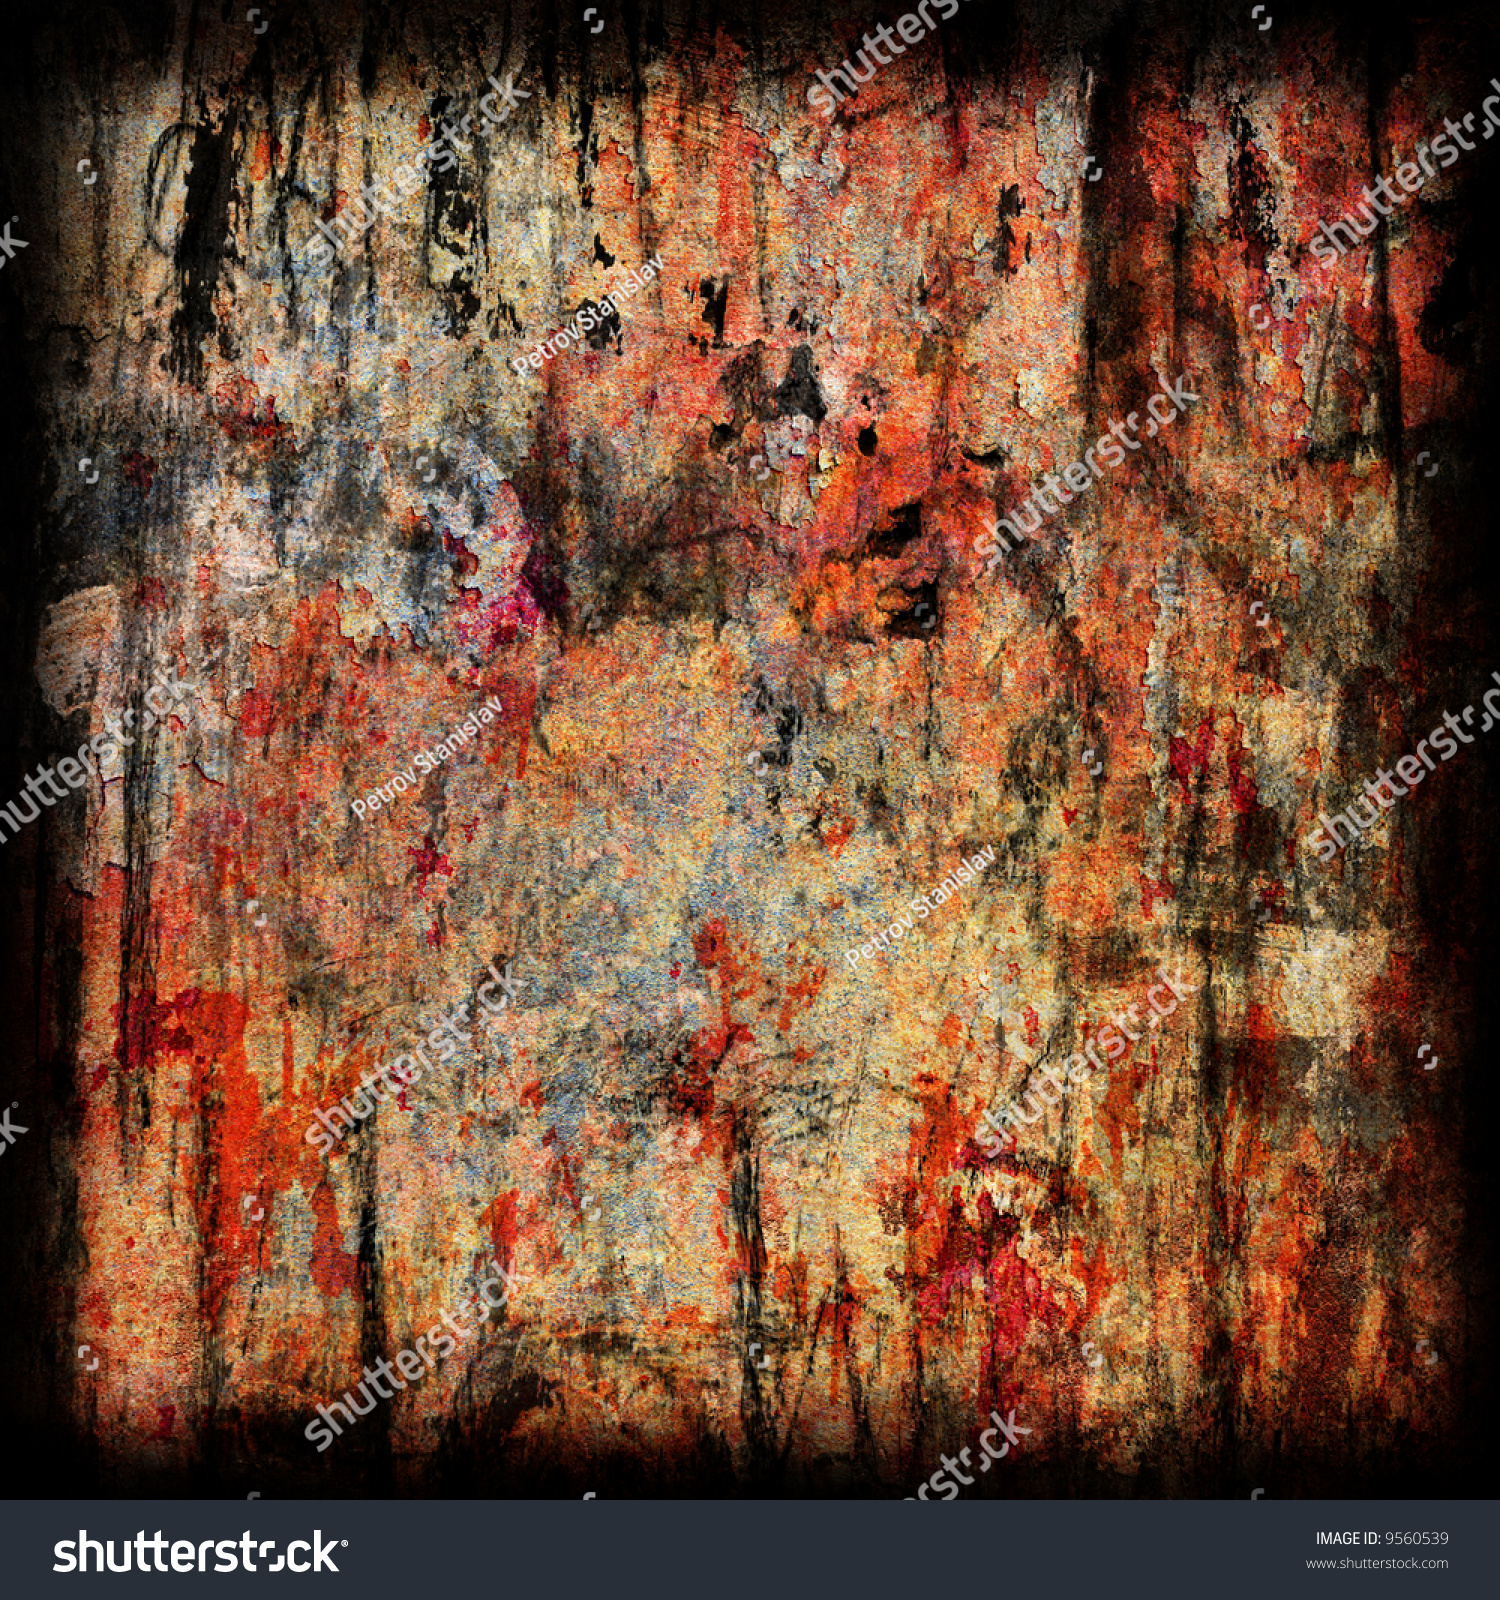 Grunge Rusted Metal Wall Stock Photo (Royalty Free) 9560539 ...